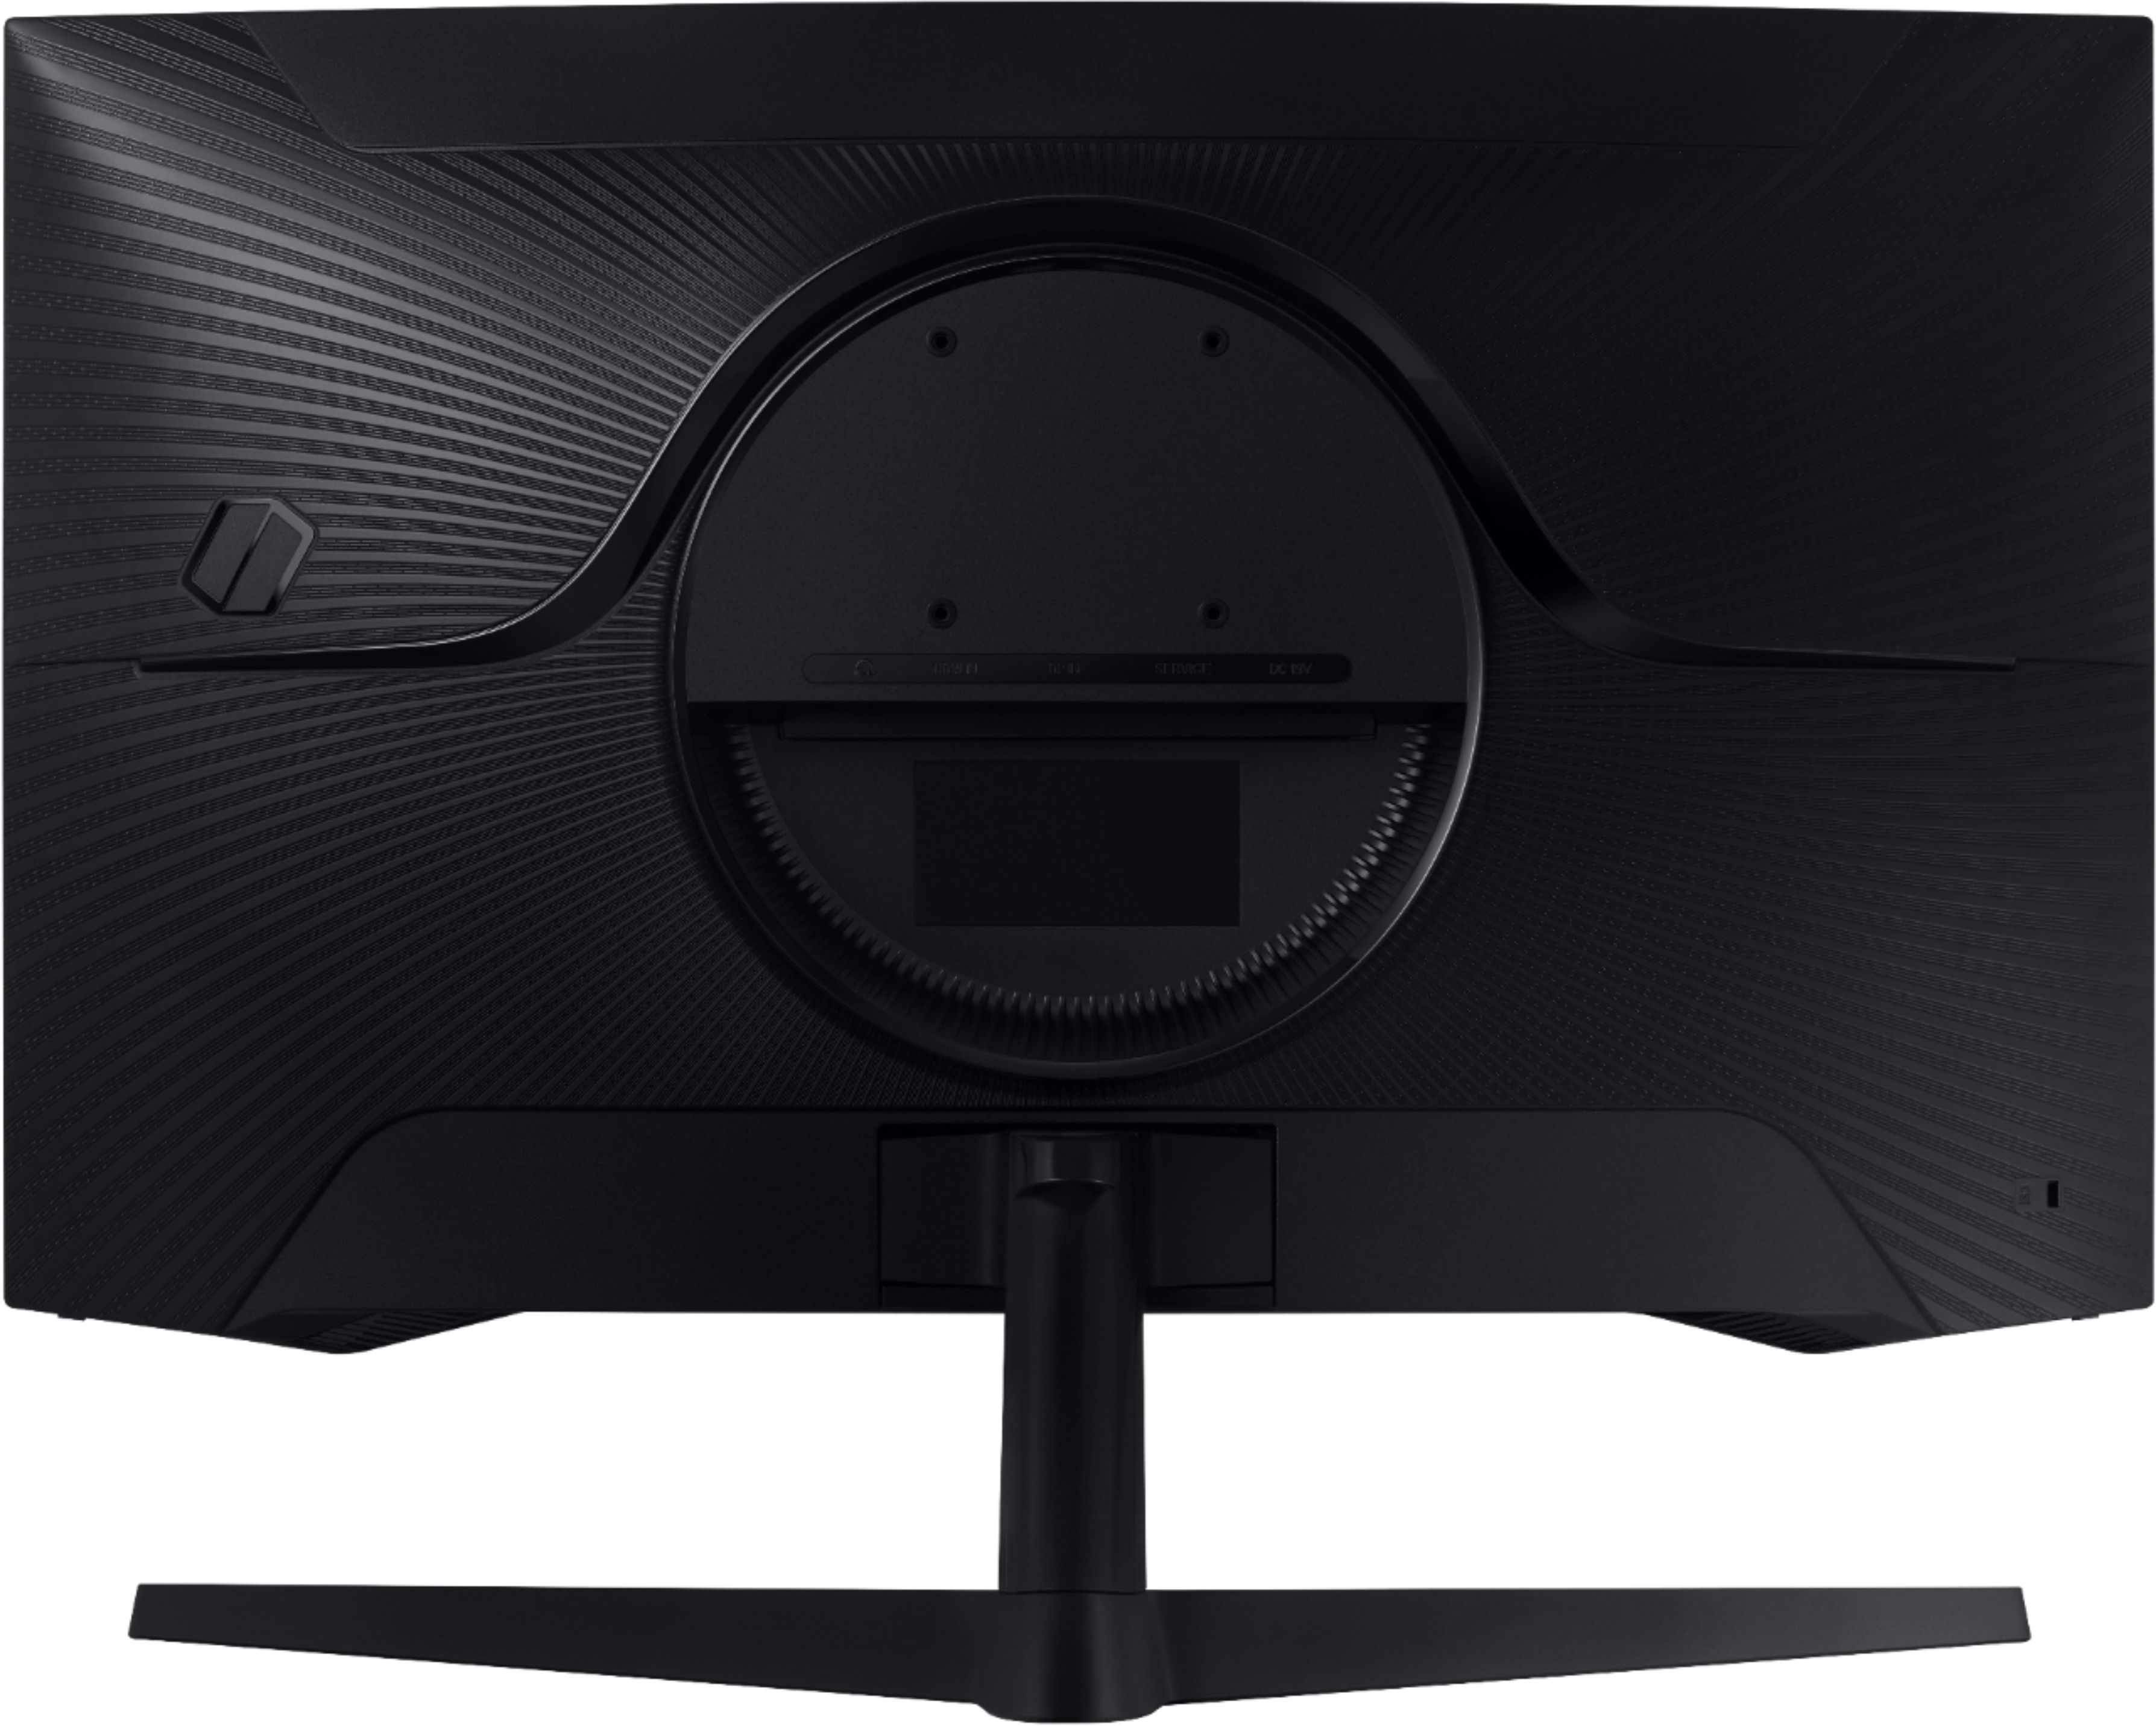 Back View: Samsung - S70A Series 27" UHD High Resolution Monitor with HDR (HDMI, USB) - Black